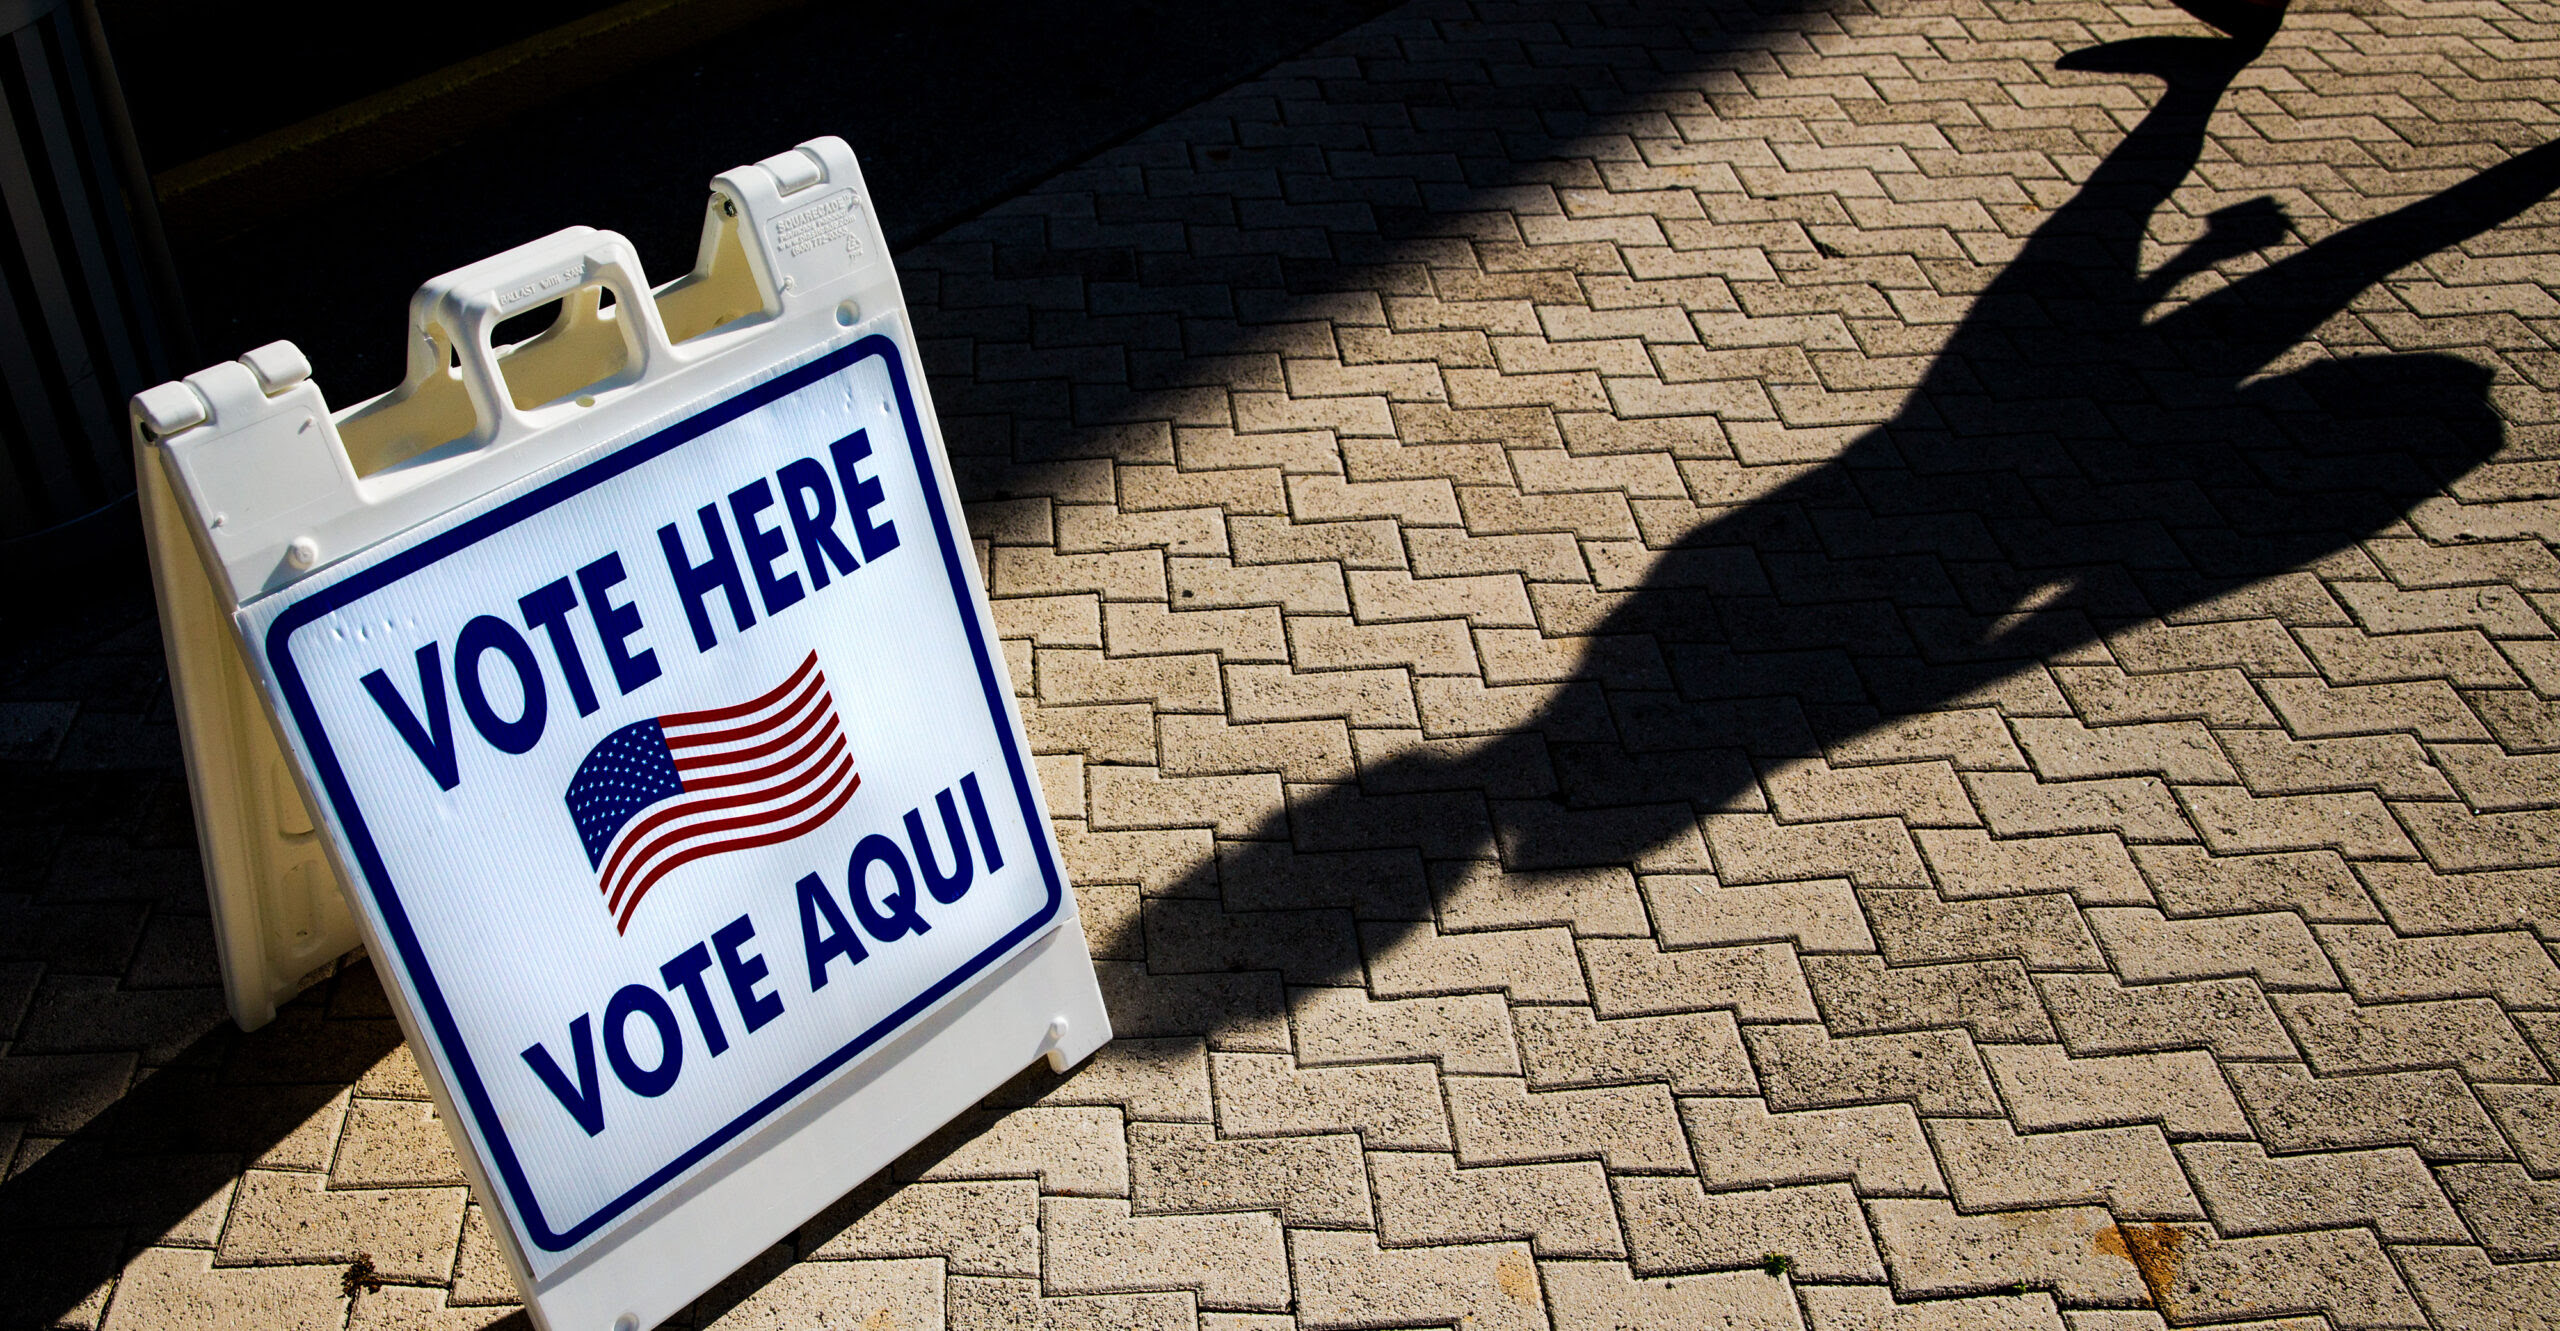 Tens of Thousands of Cases of Possible Vote Fraud Cited in New Report